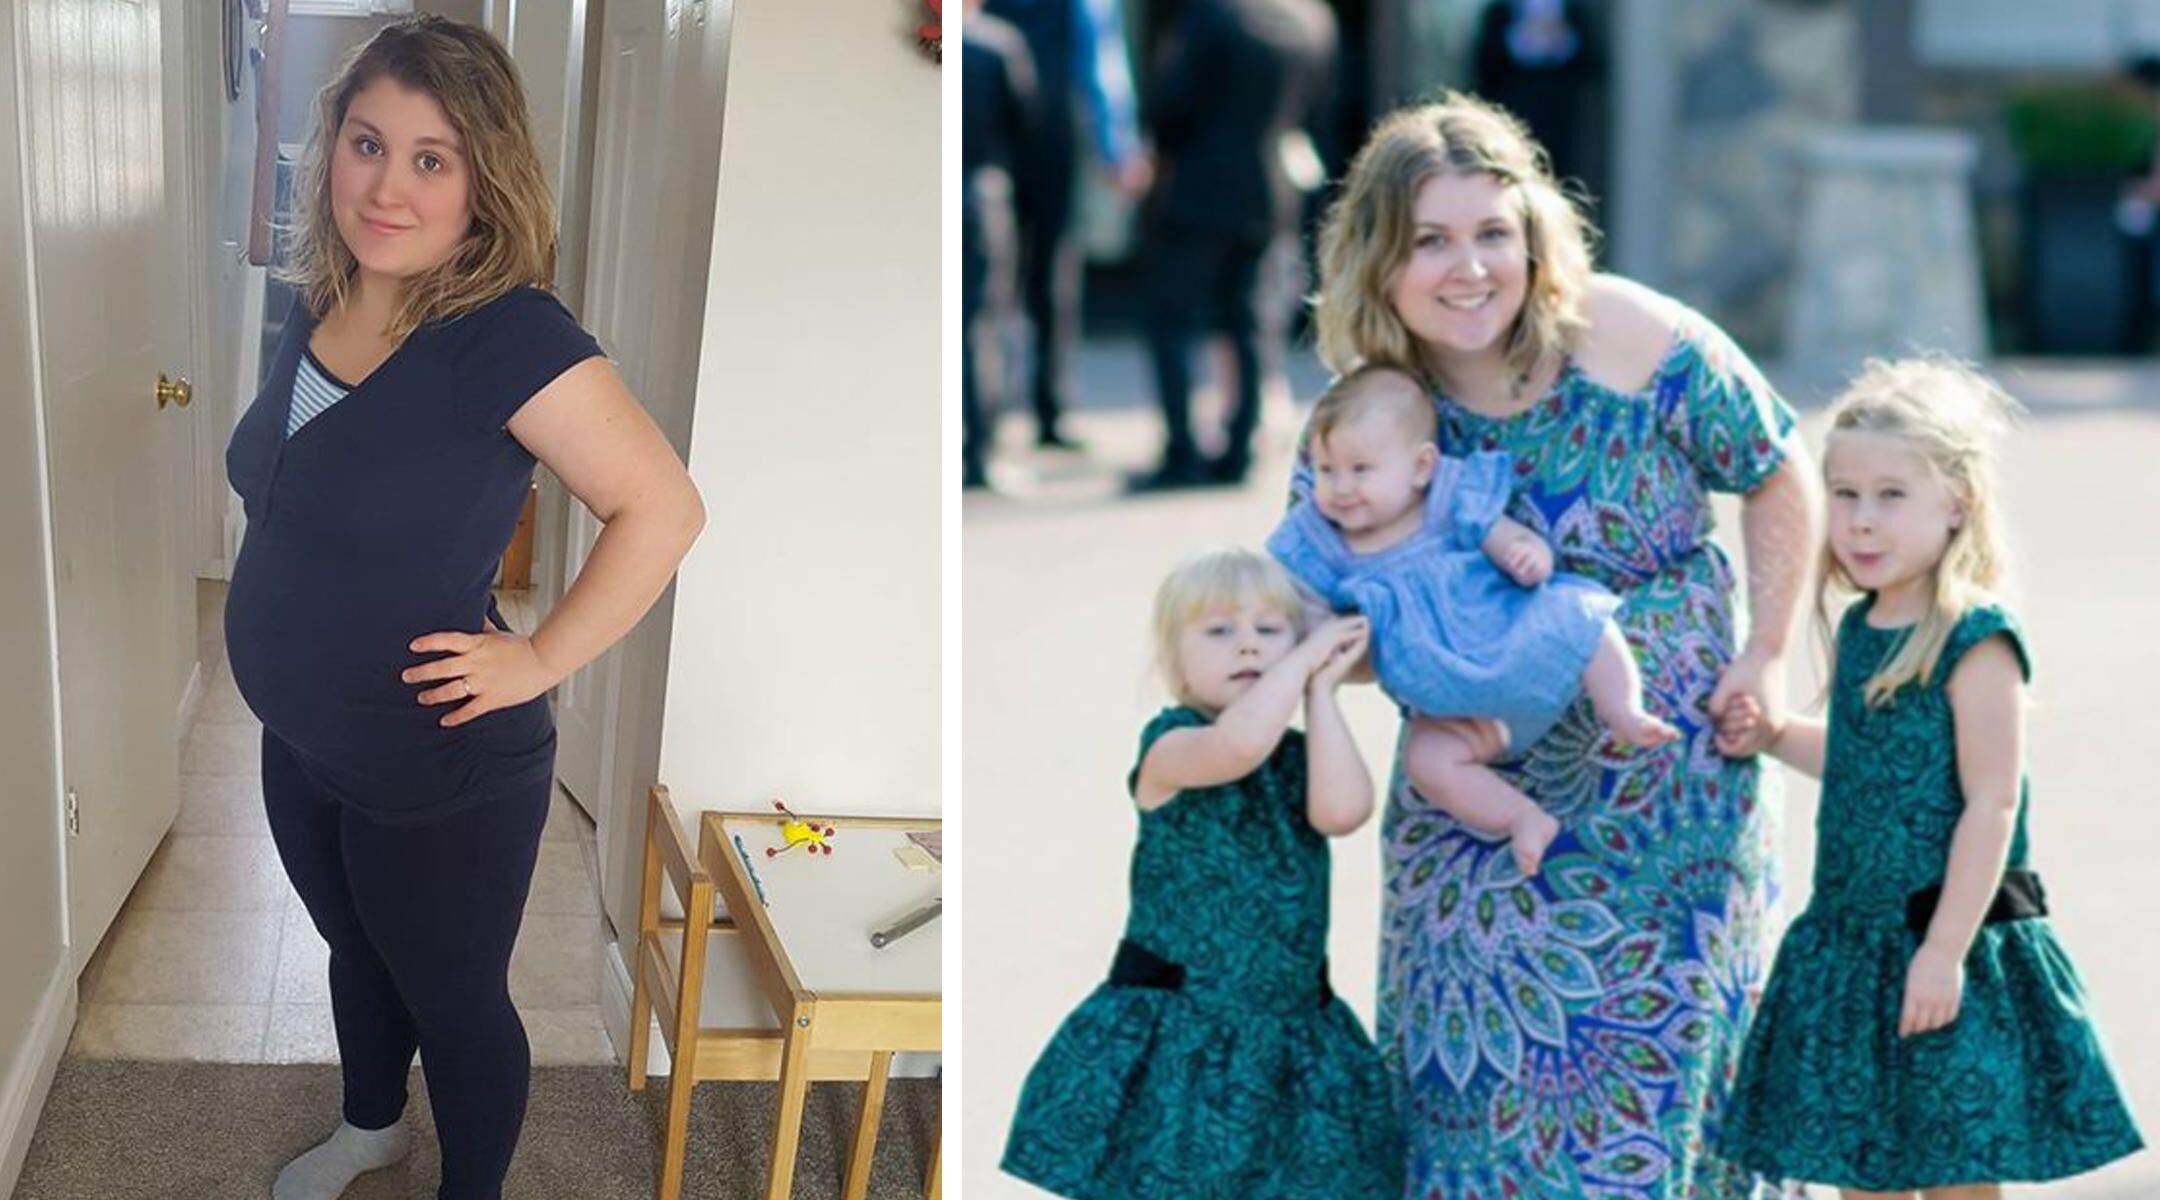 Mom Proudly Shares ‘Before’ Weight Loss Photo: ‘My Body Is a Vessel'